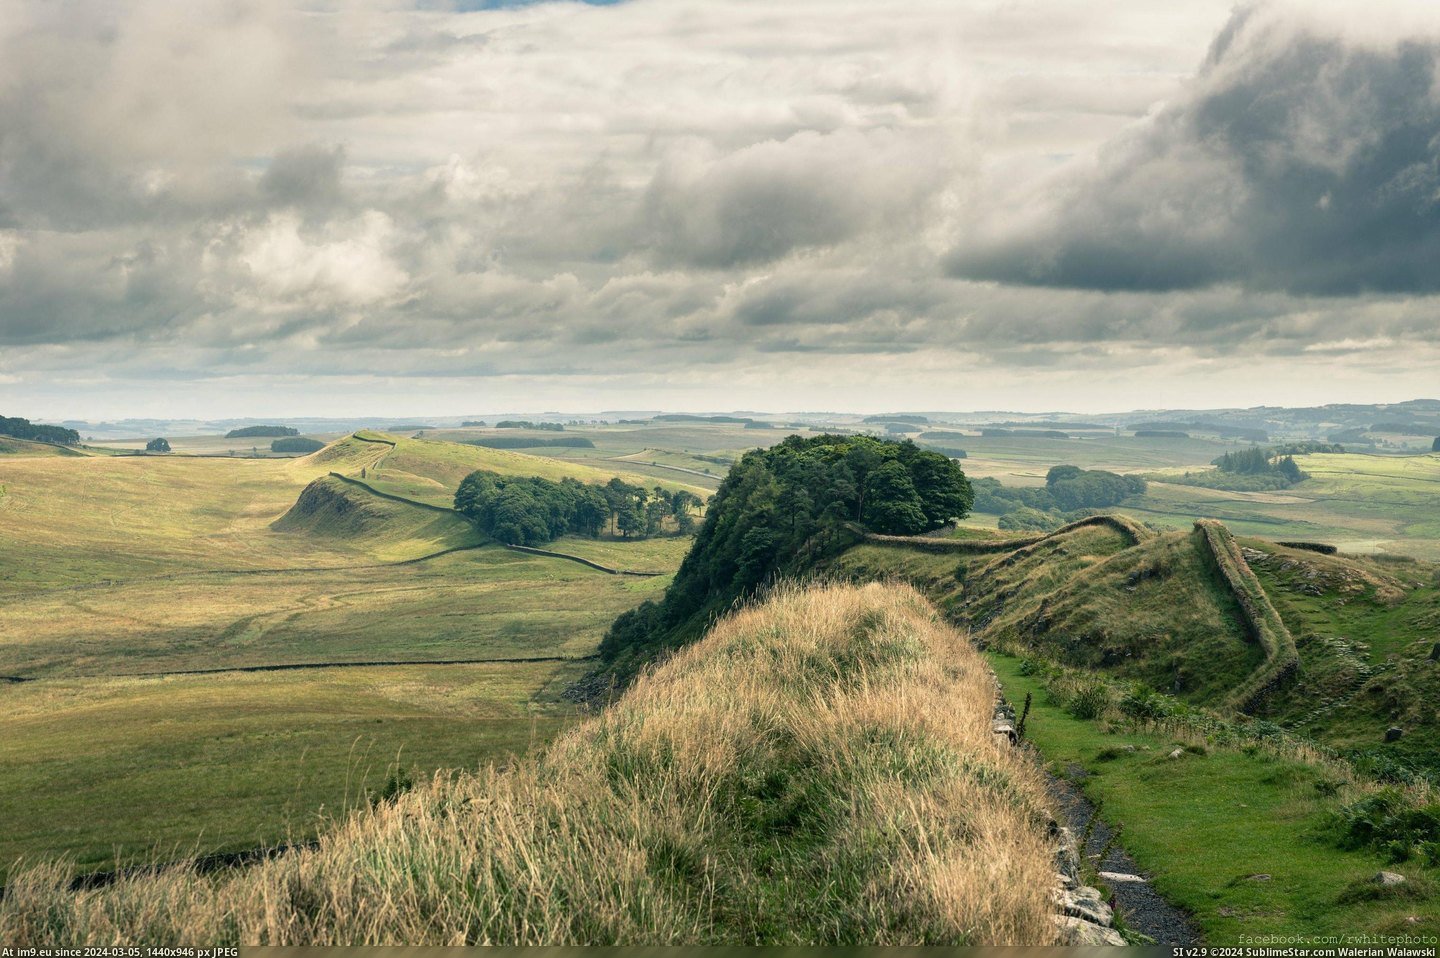 #Show #Wall #Allowed #Impossible #Hadrian #Landscape #Stunning [Earthporn] I don't know if this will be allowed here, but it's impossible to show the stunning landscape around Hadrian's Wall  Pic. (Изображение из альбом My r/EARTHPORN favs))